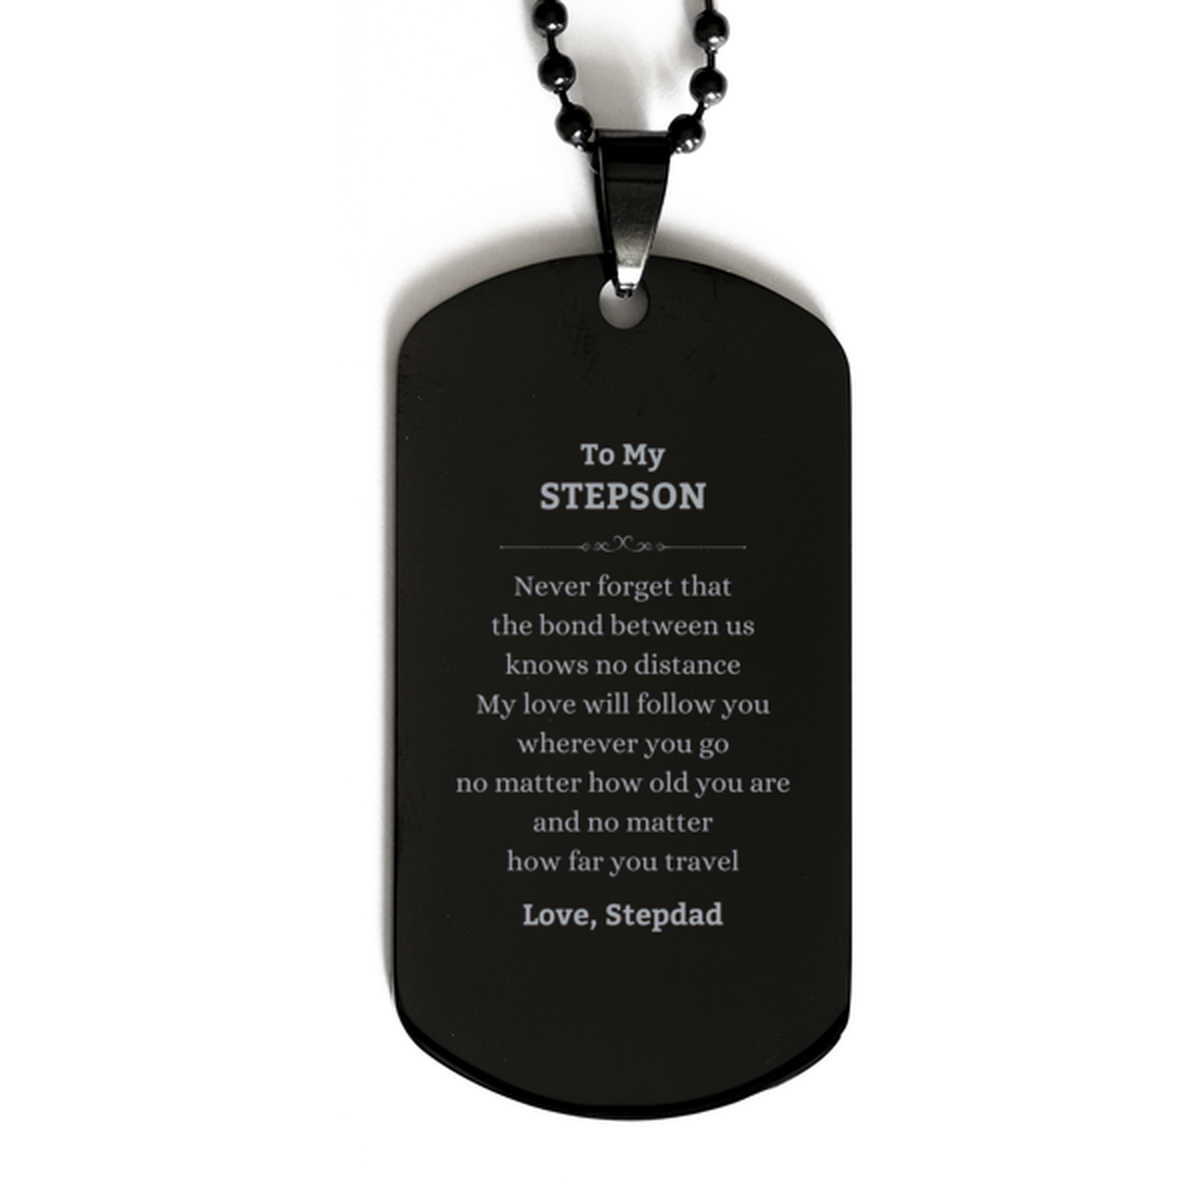 Stepson Birthday Gifts from Stepdad, Adjustable Black Dog Tag for Stepson Christmas Graduation Unique Gifts Stepson Never forget that the bond between us knows no distance. Love, Stepdad